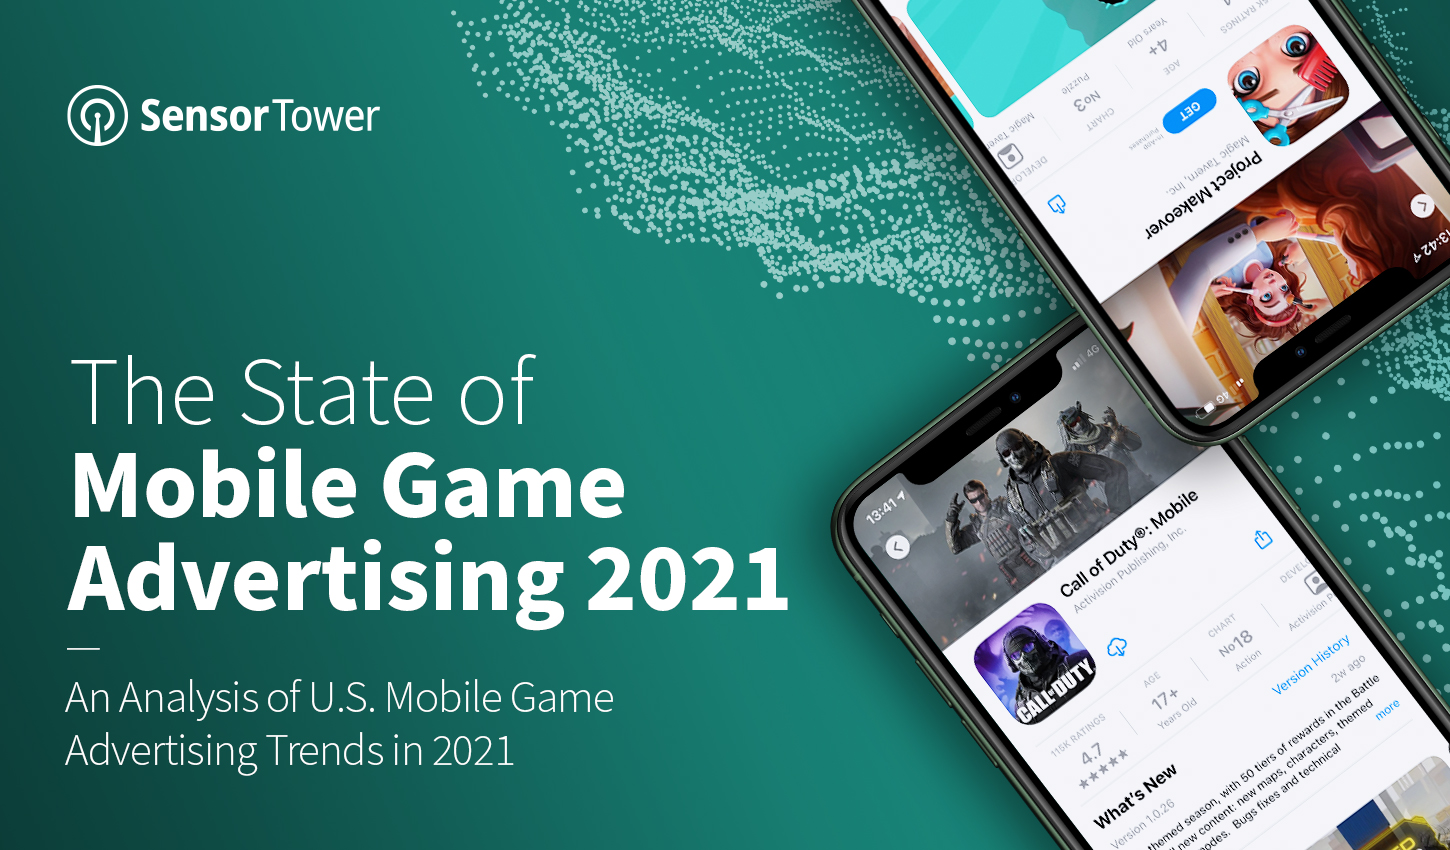 Sensor Tower’s State of Mobile Game Advertising 2021 Report